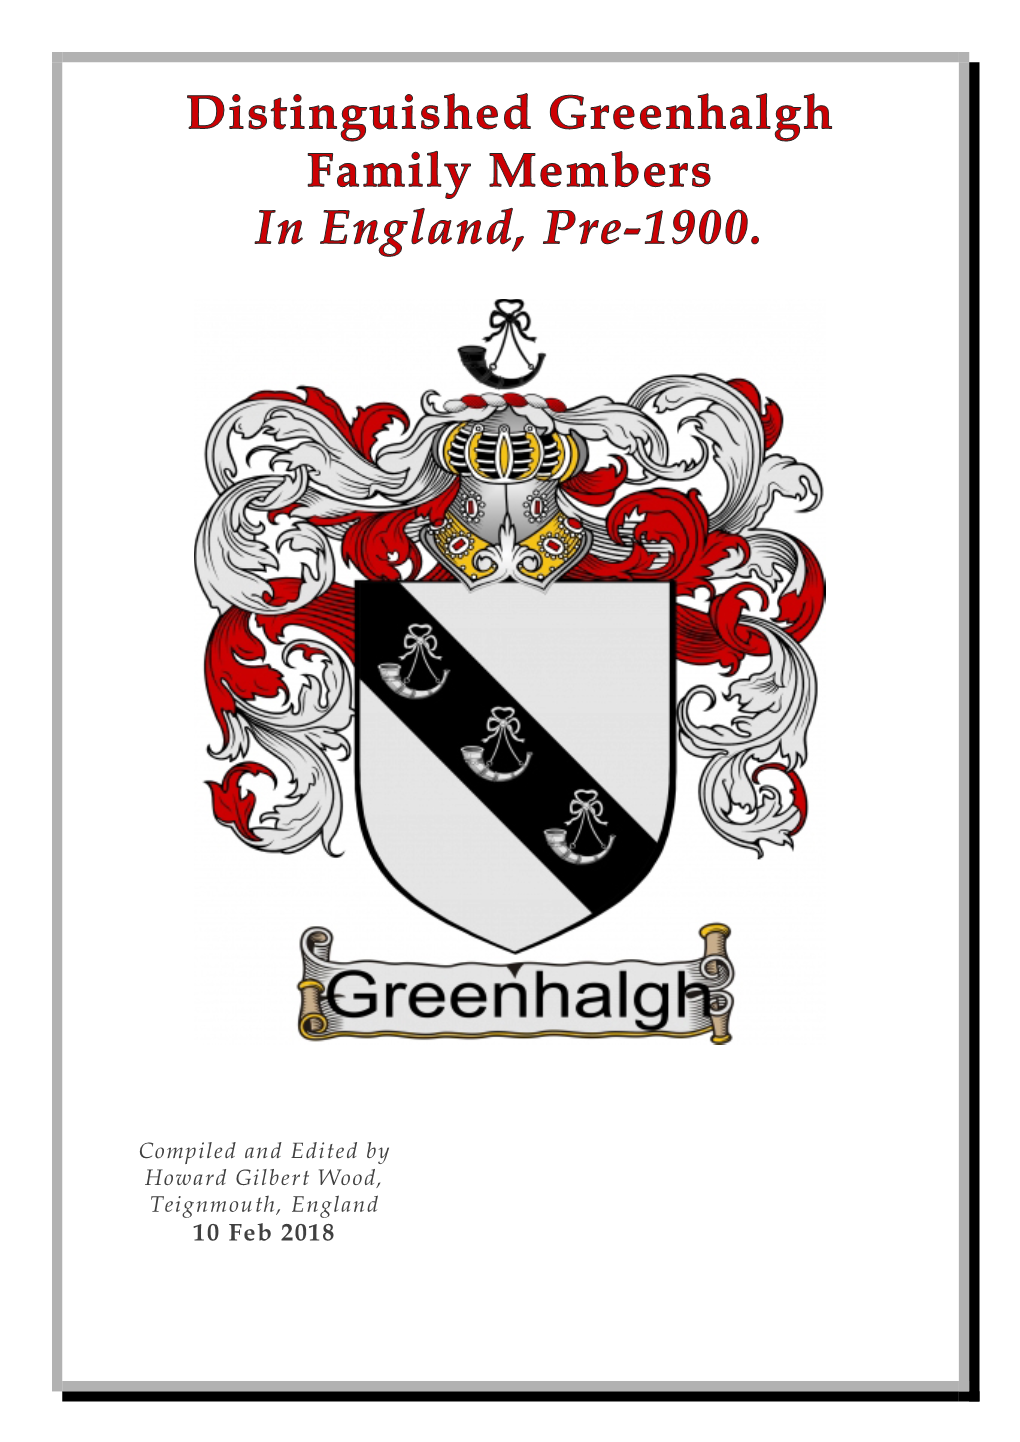 John Greenhalgh (1597 – 1651) Captian & Governor of the Isle of Man (1640 – 1651)